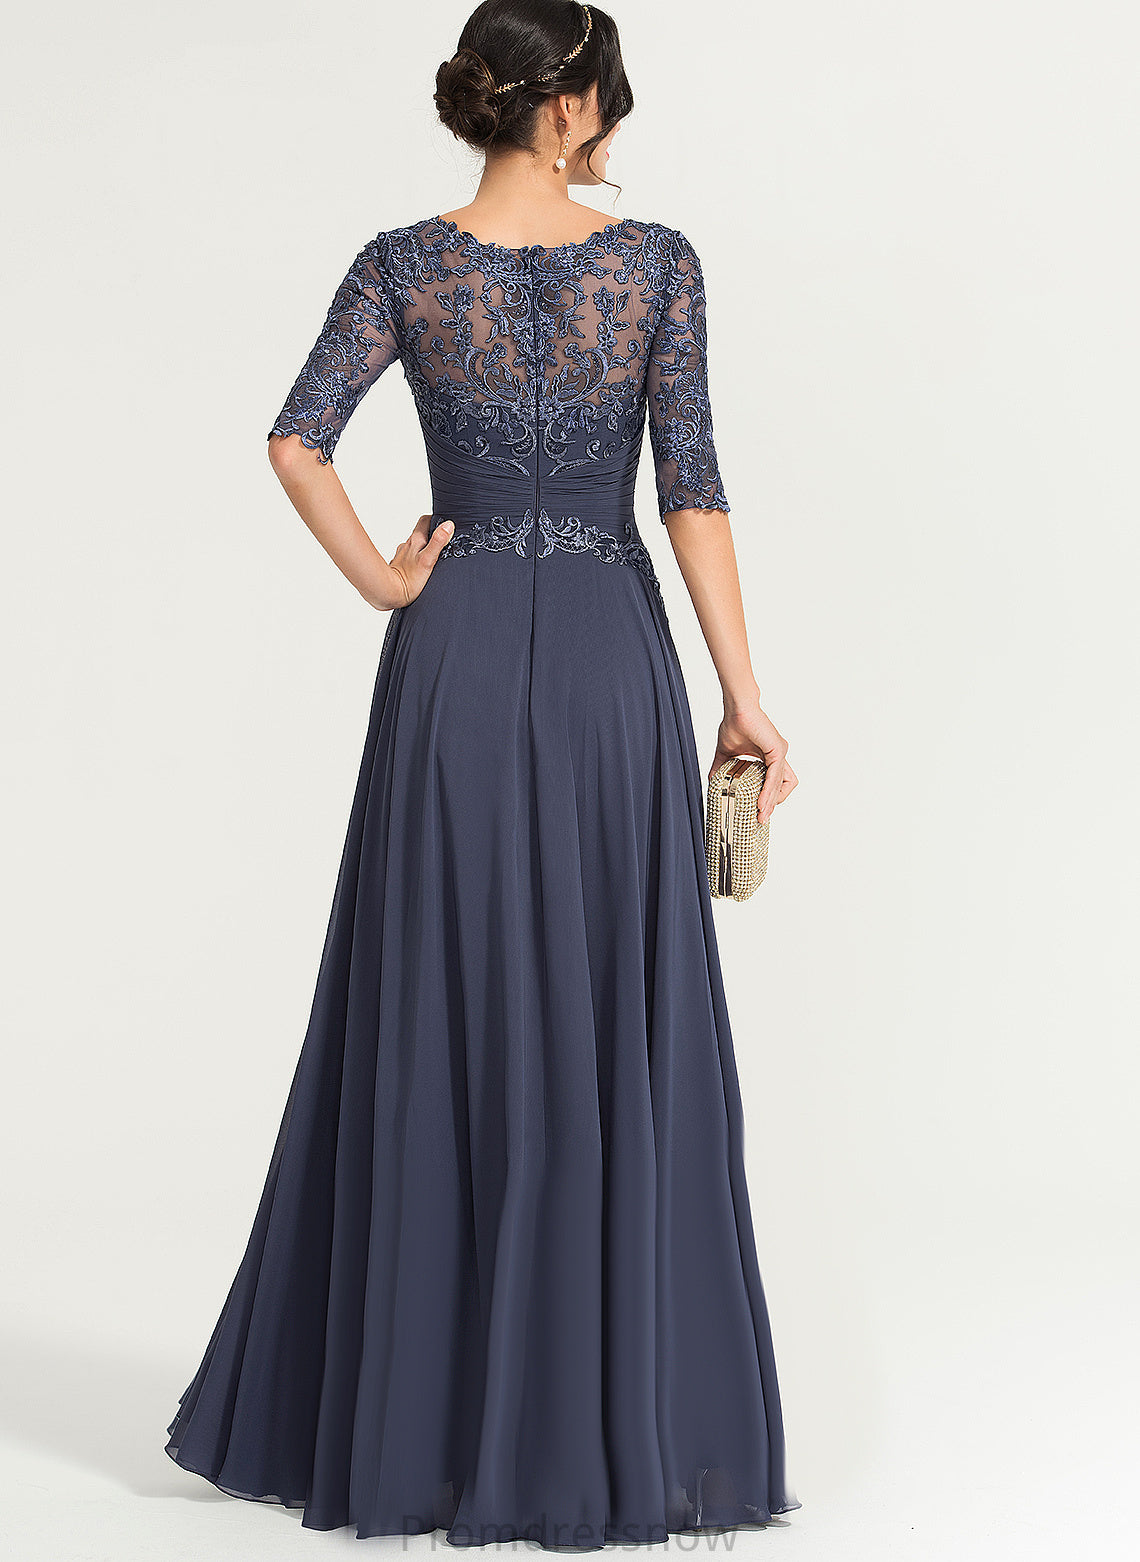 Chiffon Scoop Lace Pleated With Cindy Prom Dresses A-Line Sequins Illusion Floor-Length